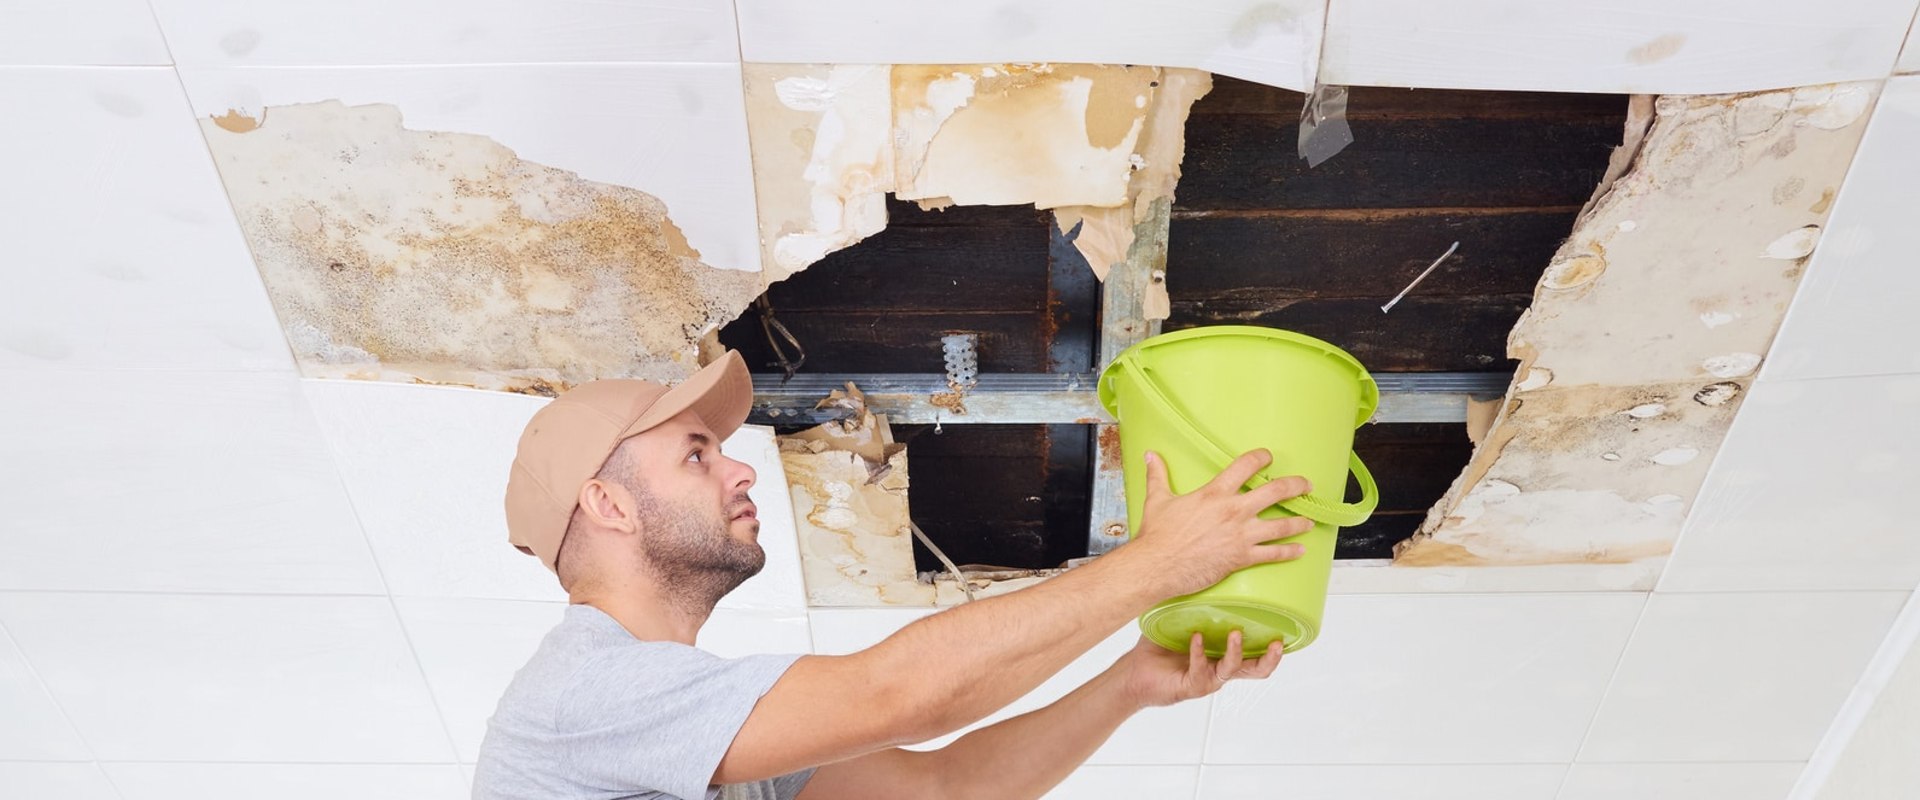 What Does a Water Damage Restoration Company Do?